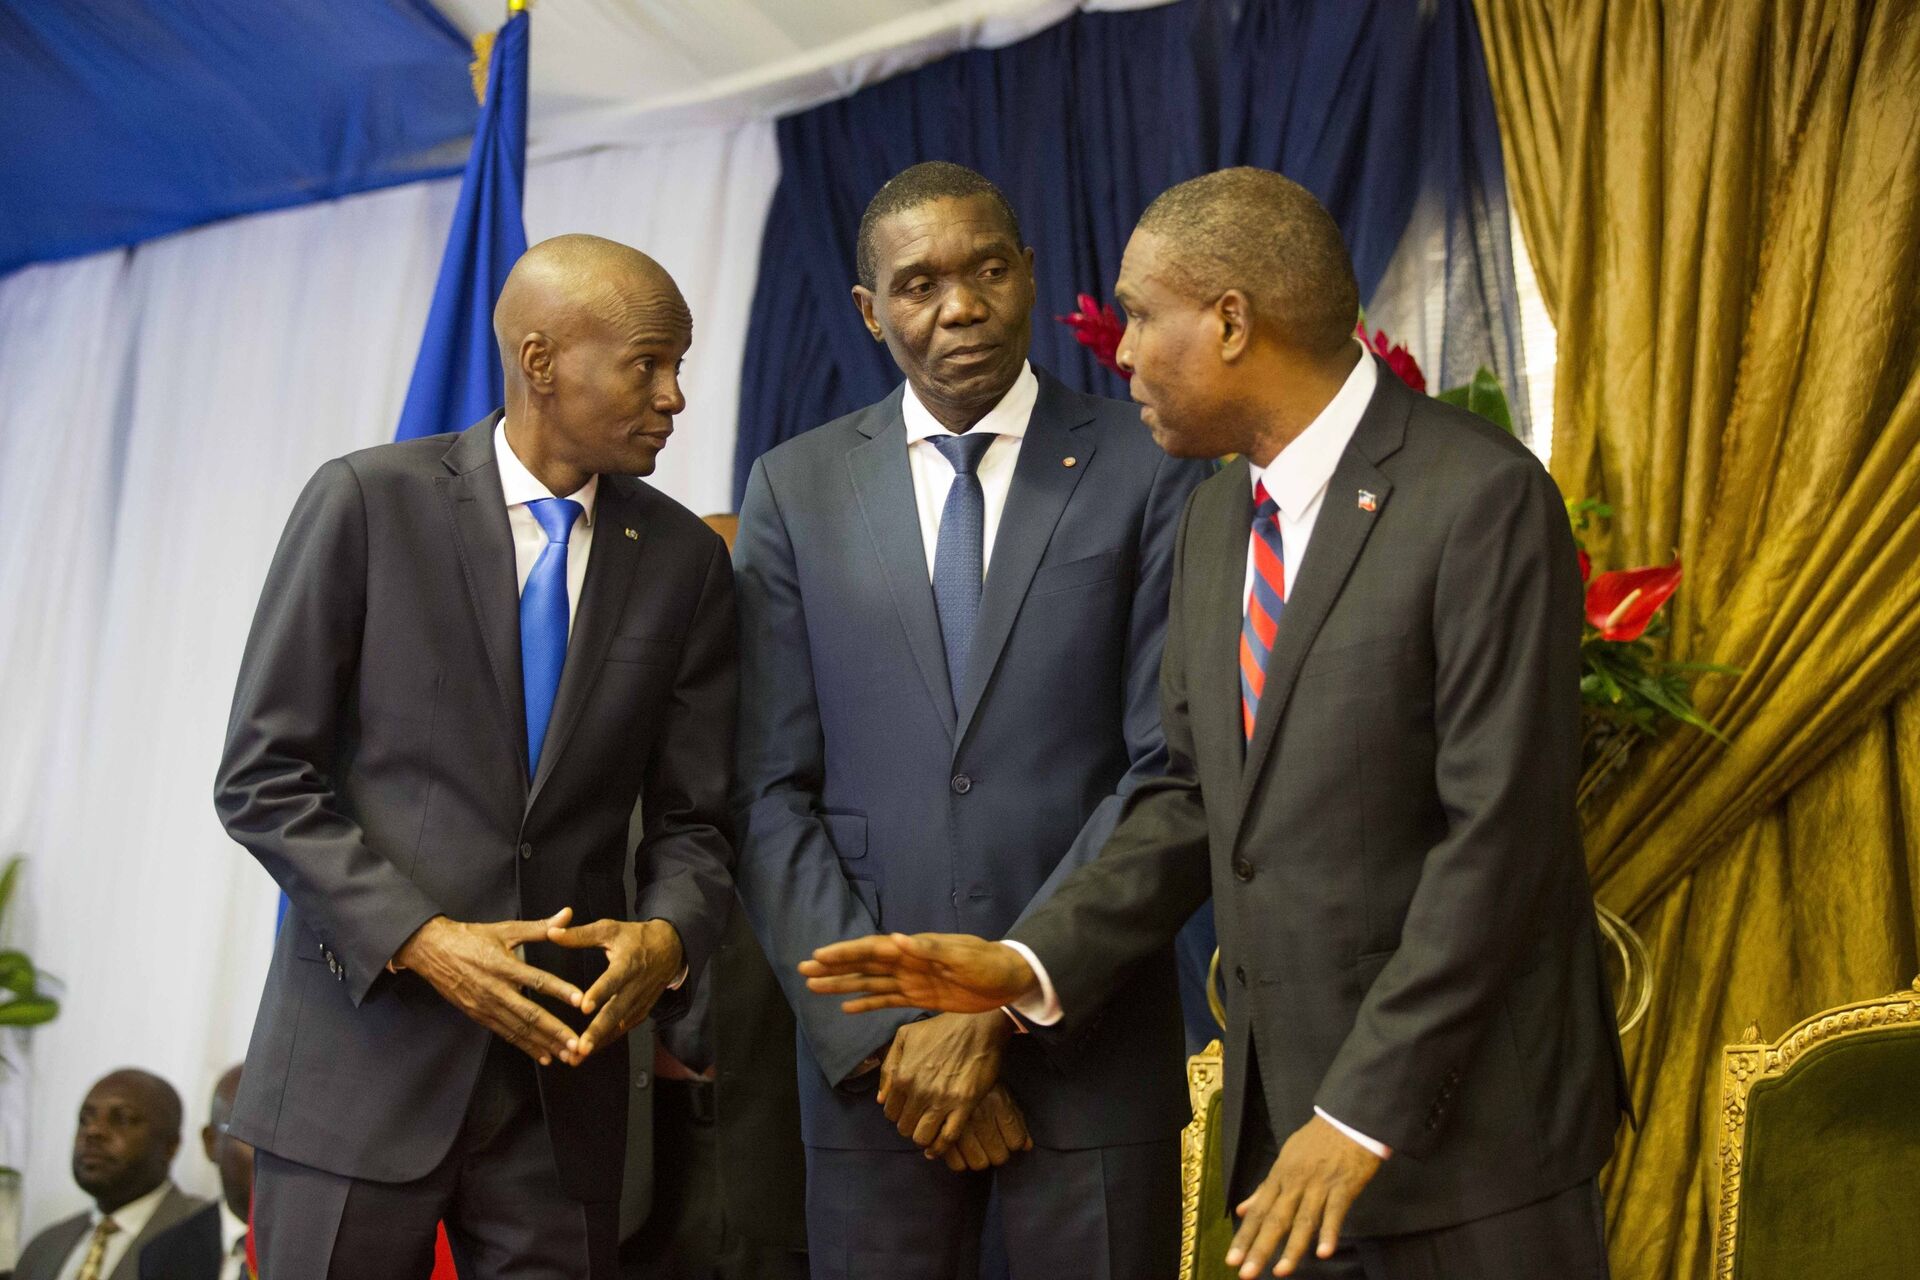 In this Aug. 7, 2018 file photo, Haiti's newly-named Prime Minister Jean-Henry Ceant, right, talks to Haiti's President Jovenel Moise, left, and Senate President Joseph Lambert, during his appointment ceremony at the national Palace in Port-au-Prince, Haiti. - Sputnik International, 1920, 07.09.2021